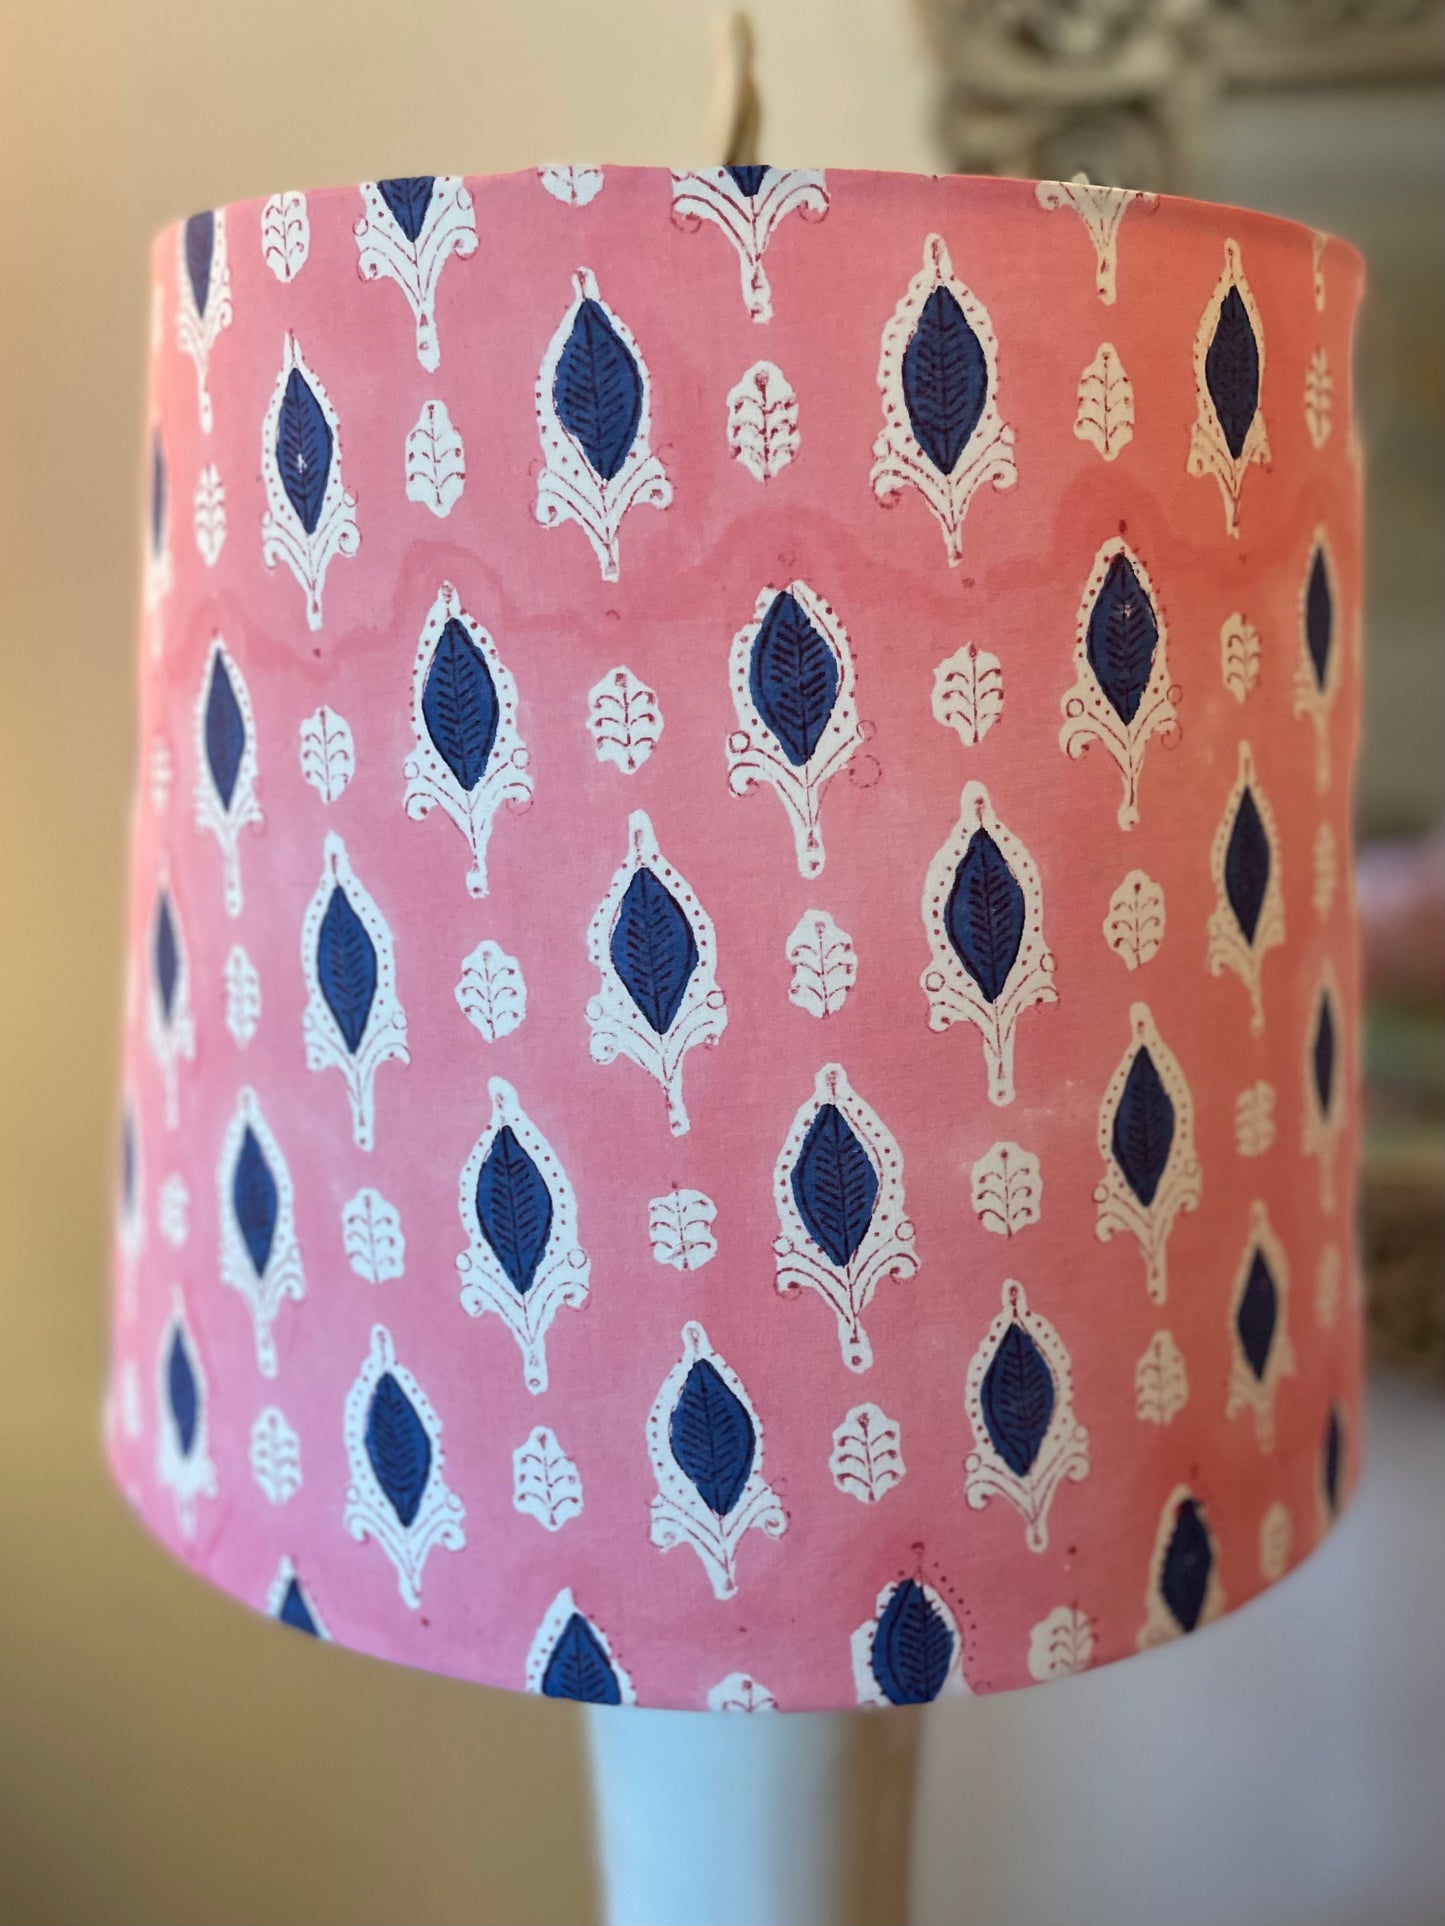 Large Empire Lampshade. 11.75 x 13.75 x 11.75. Indian Hand Block Print. Rosy Pink with Navy and White.